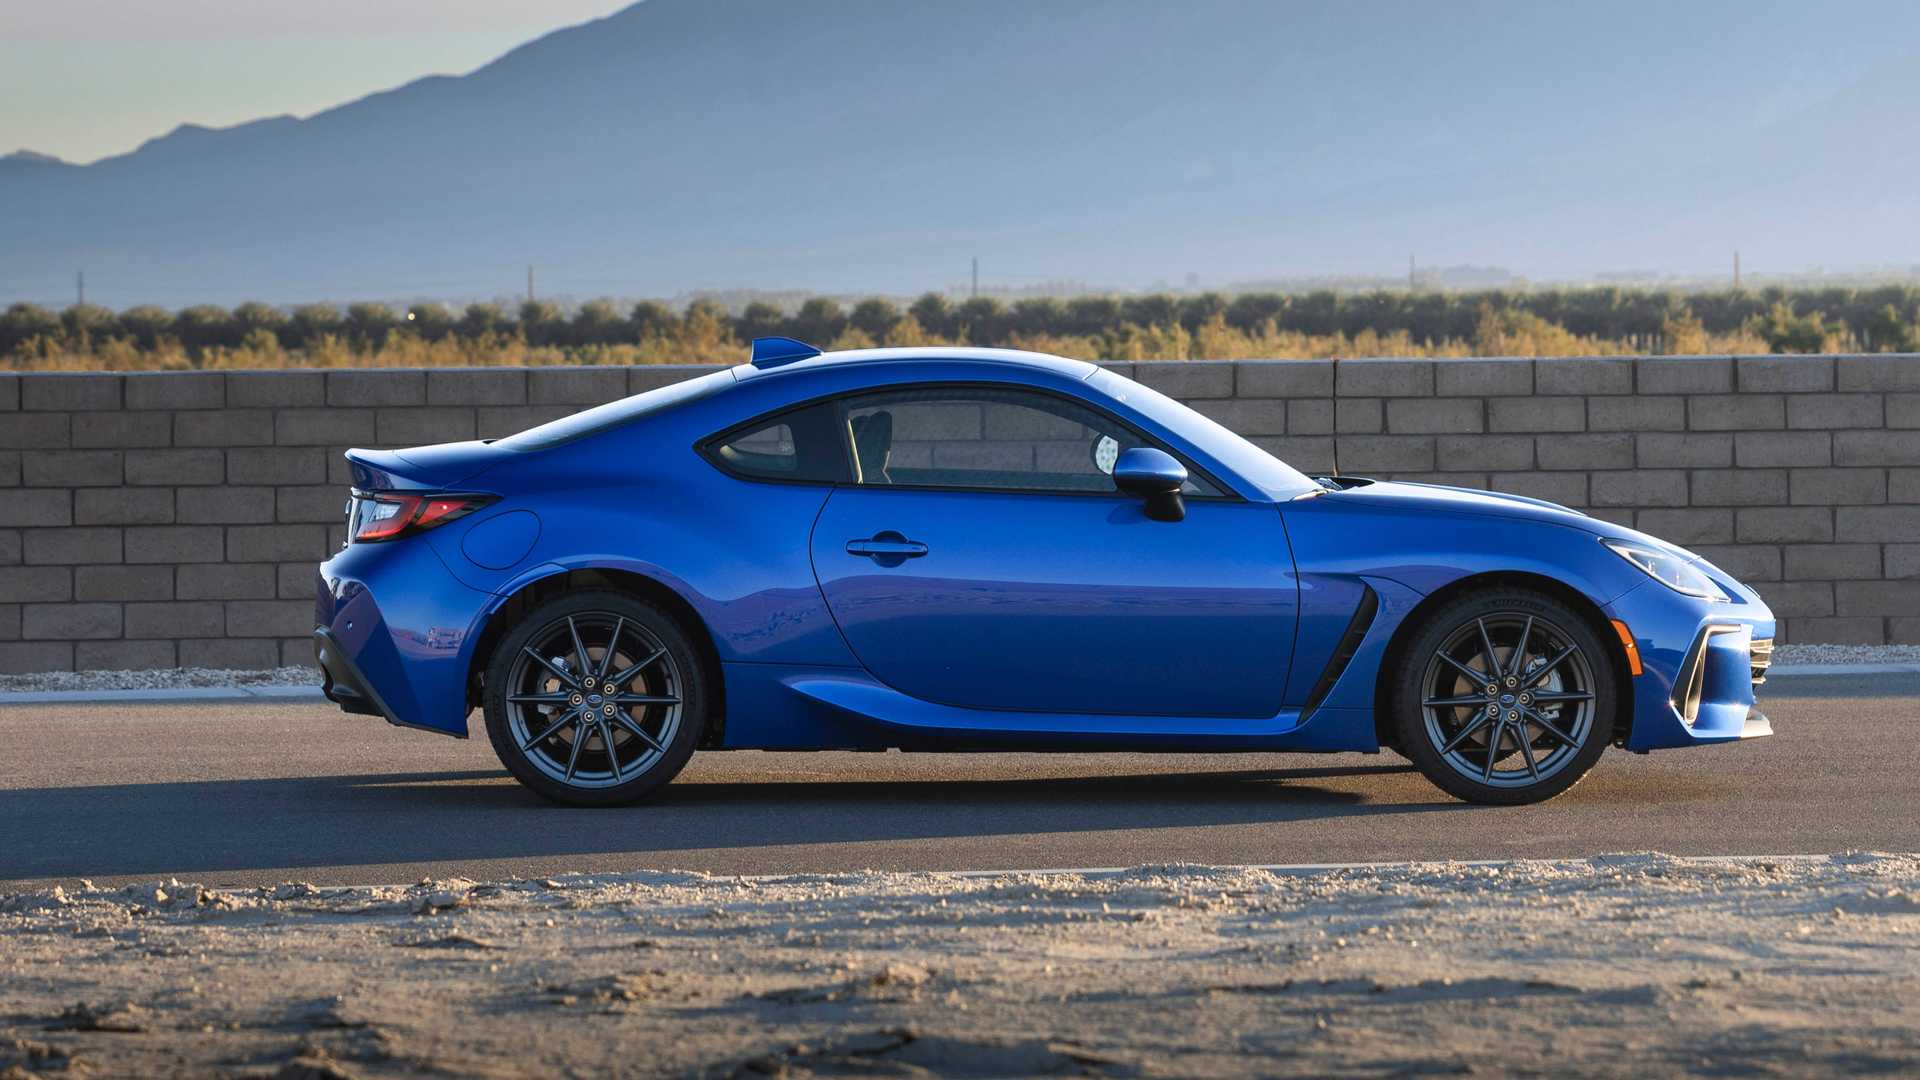 First Look: 2022 Subaru BRZ Revealed With New Design, More ...